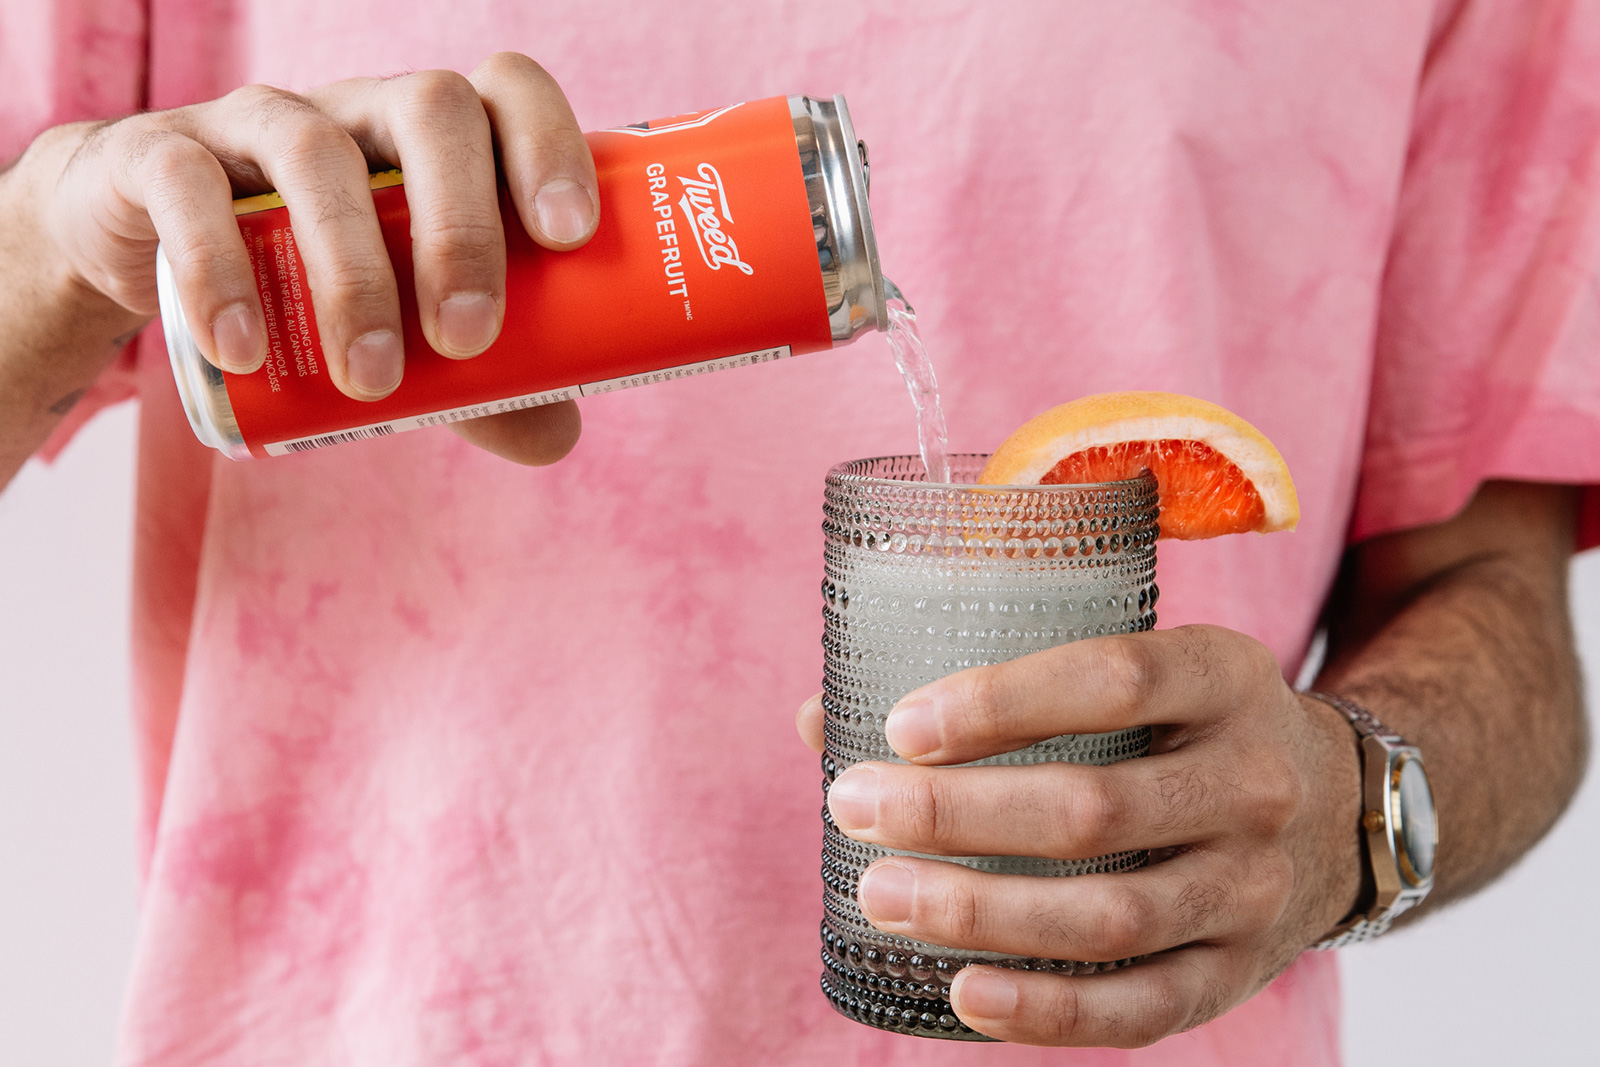 a person in a pink shirt pours a Tweed Grapefruit drink into a glass